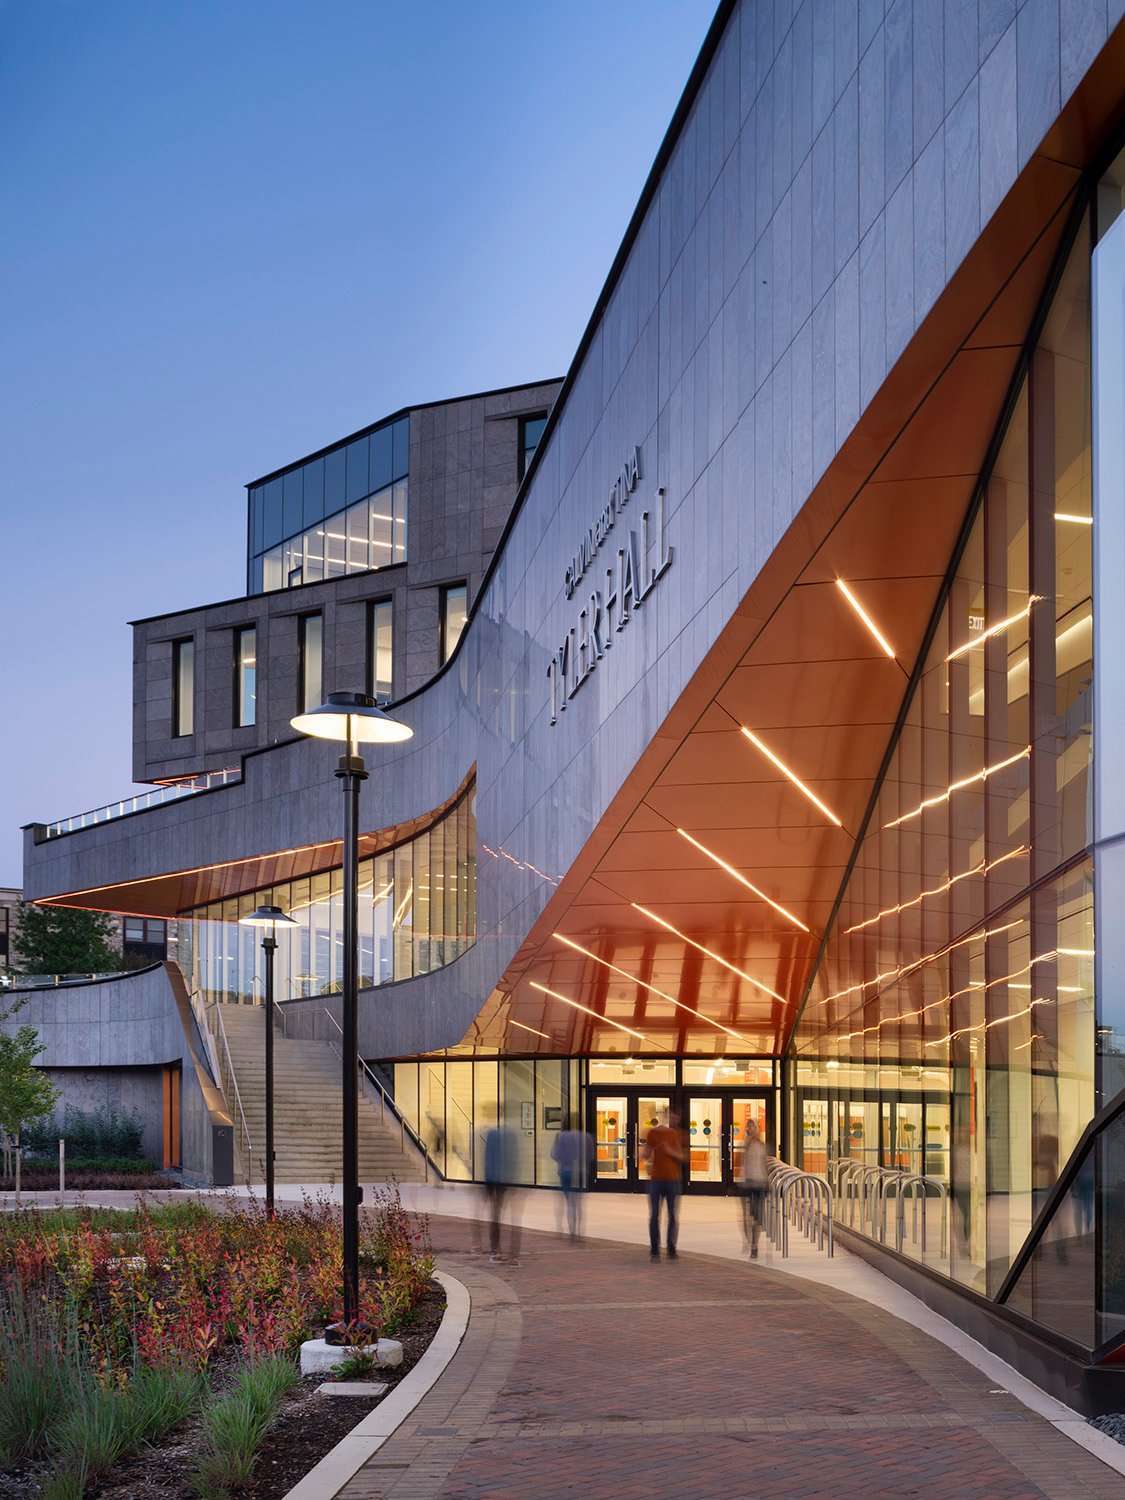 Students and visitors are drawn towards the street-level entrance by the sweeping lines of the facade. An exterior stair stitches the landscaped arrival court with the campus commons above. | nic lehoux photographie architecturale | architectural photography